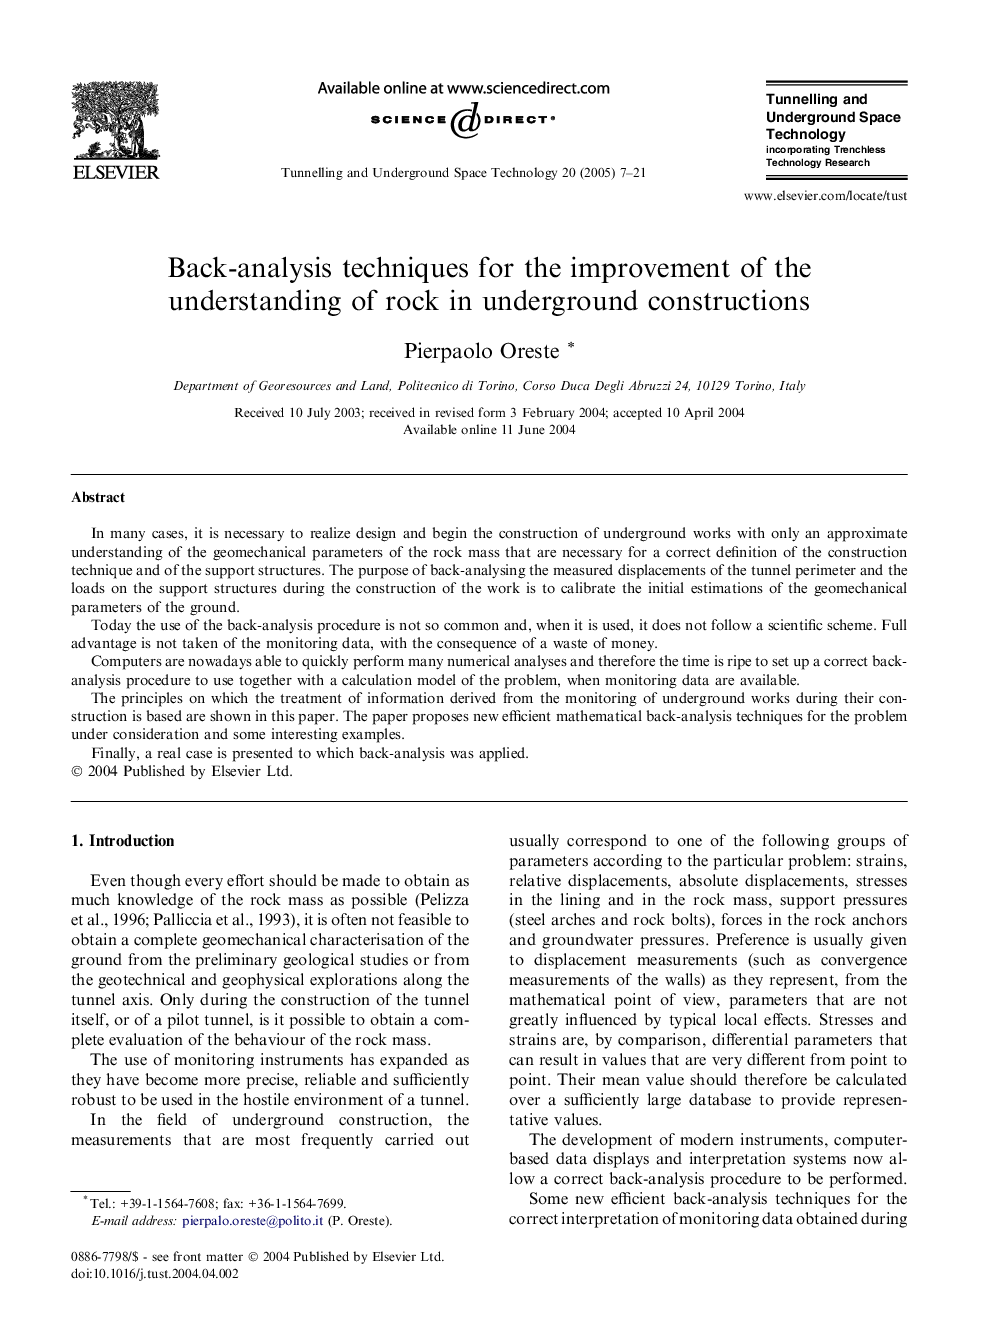 Back-analysis techniques for the improvement of the understanding of rock in underground constructions